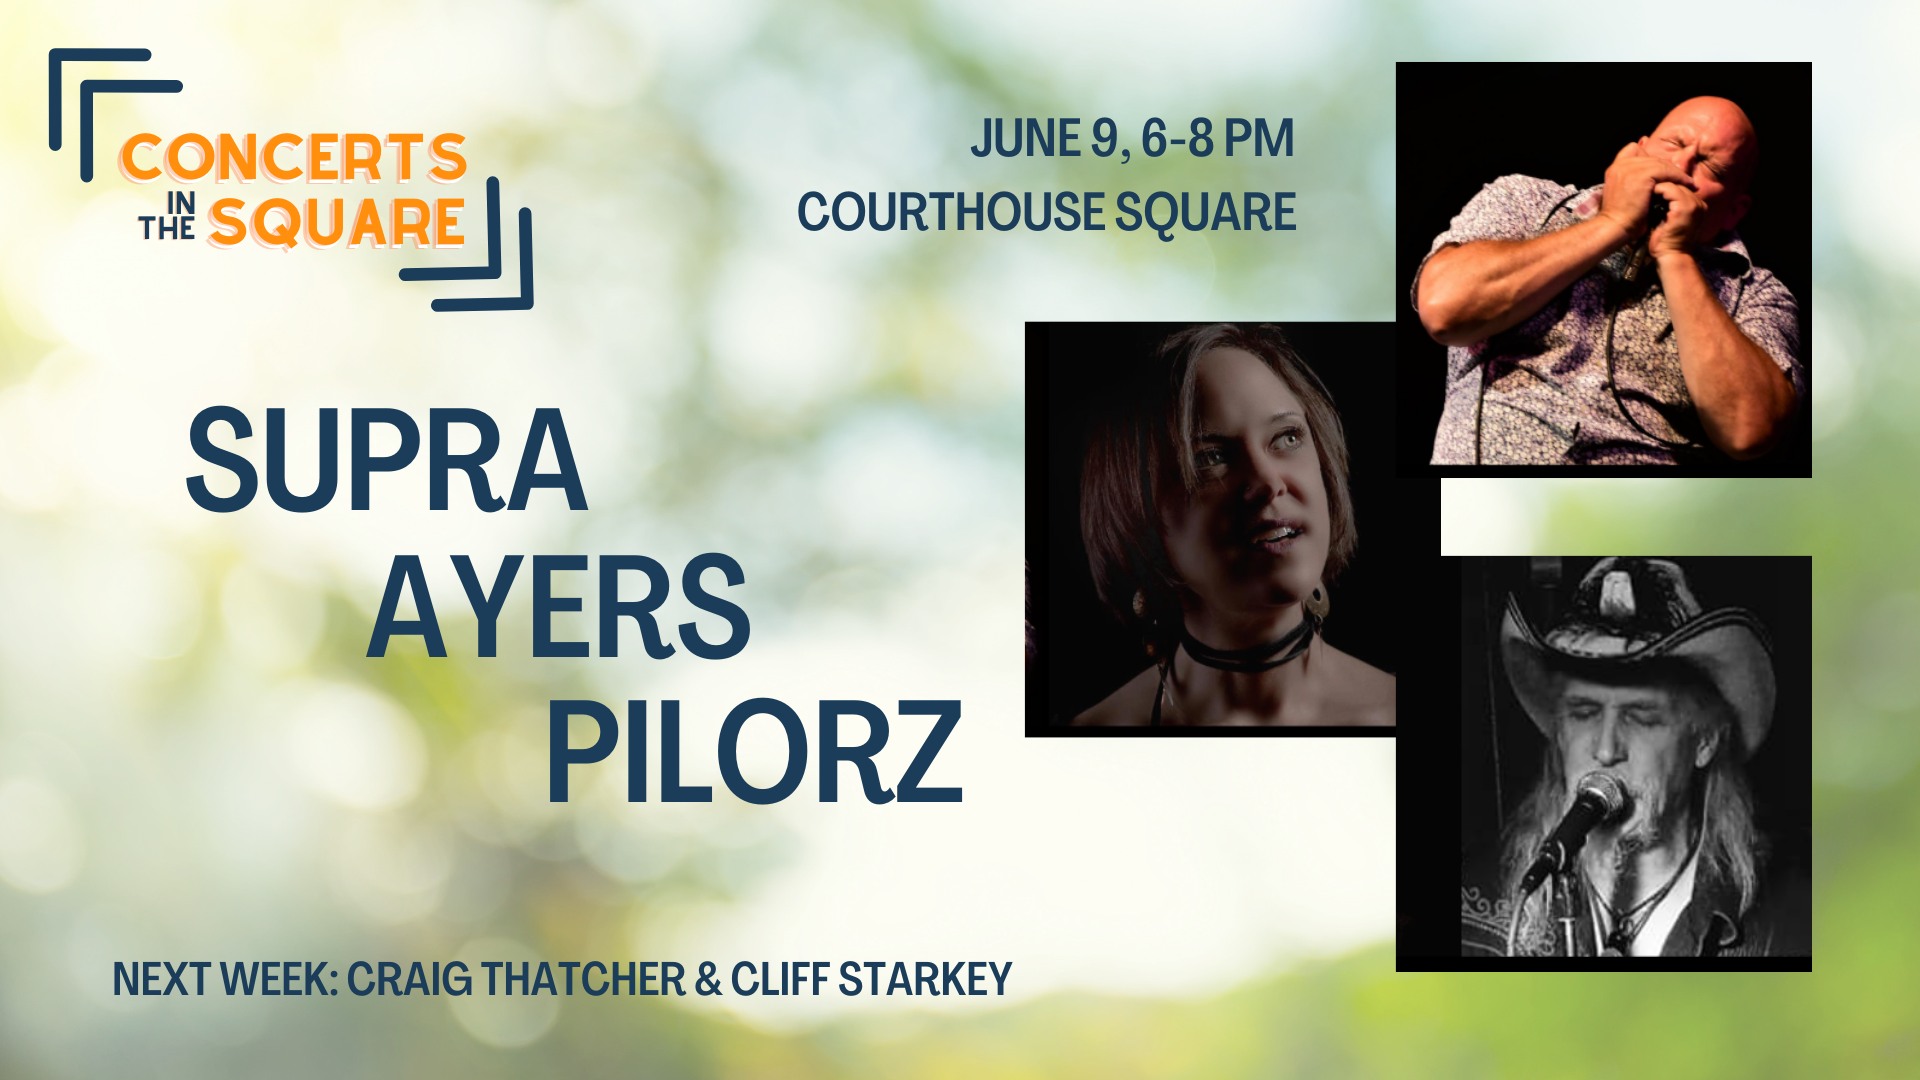 Concerts At Courthouse Square With Supra, Ayers Pilorz Pocono Update